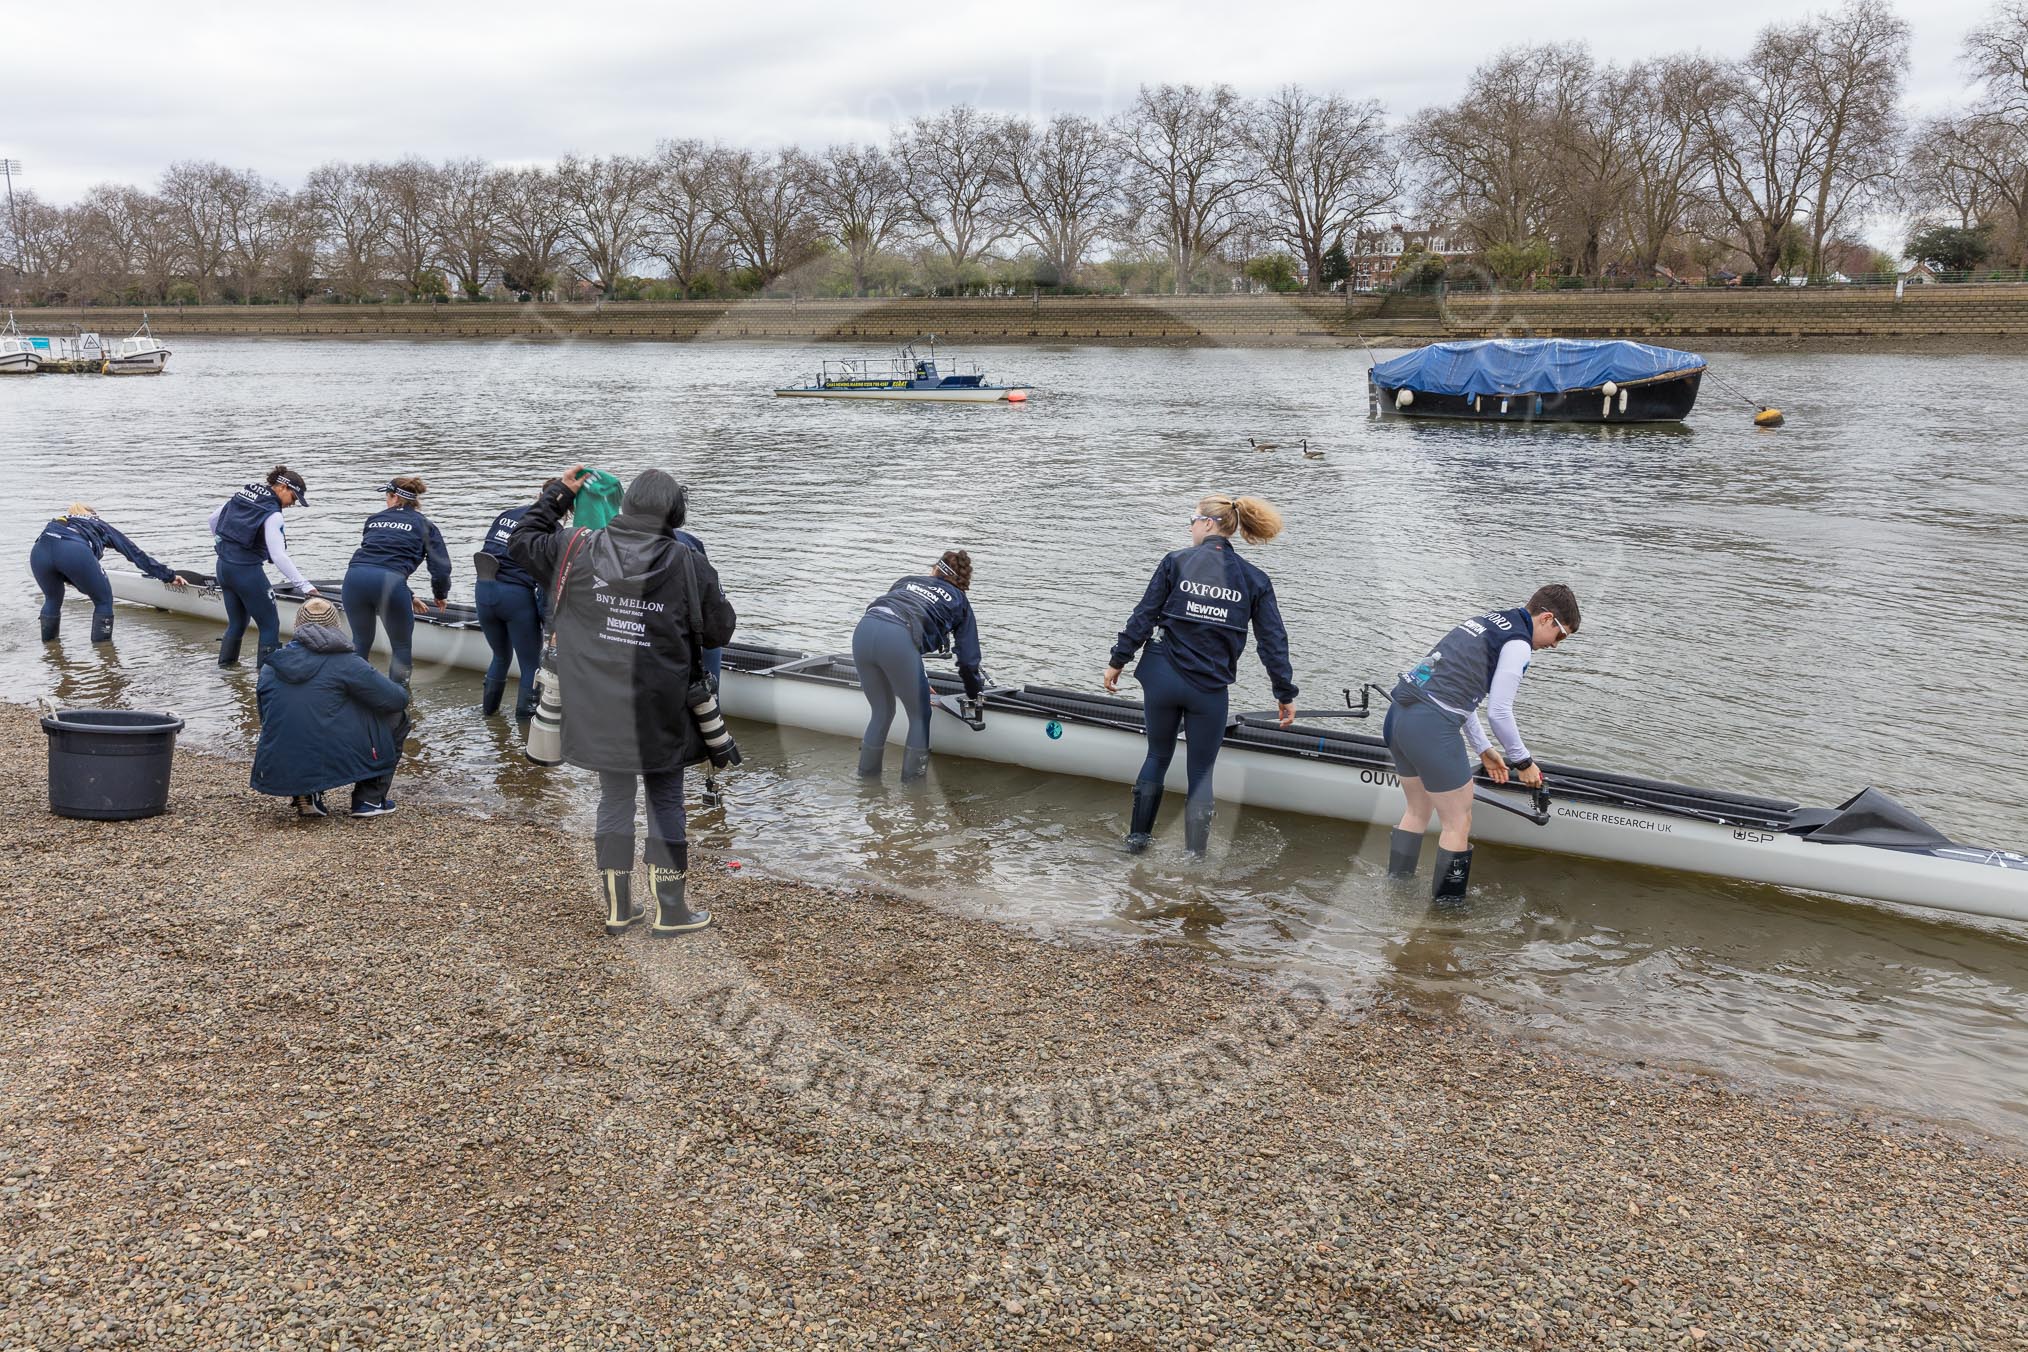 The Cancer Research UK Boat Race season 2017 - Women's Boat Race Fixture OUWBC vs Molesey BC: OUWBC getting their boat ready fro the fixture - S Emily Cameron, 7 Jenna Hebert, 6 Harriet Austin, 5 Chloe Laverack,  4 Rebecca Esselstein,  3 Rebecca Te Water Naude, 2 Beth Bridgman, B Alice Roberts.
River Thames between Putney Bridge and Mortlake,
London SW15,

United Kingdom,
on 19 March 2017 at 15:17, image #6